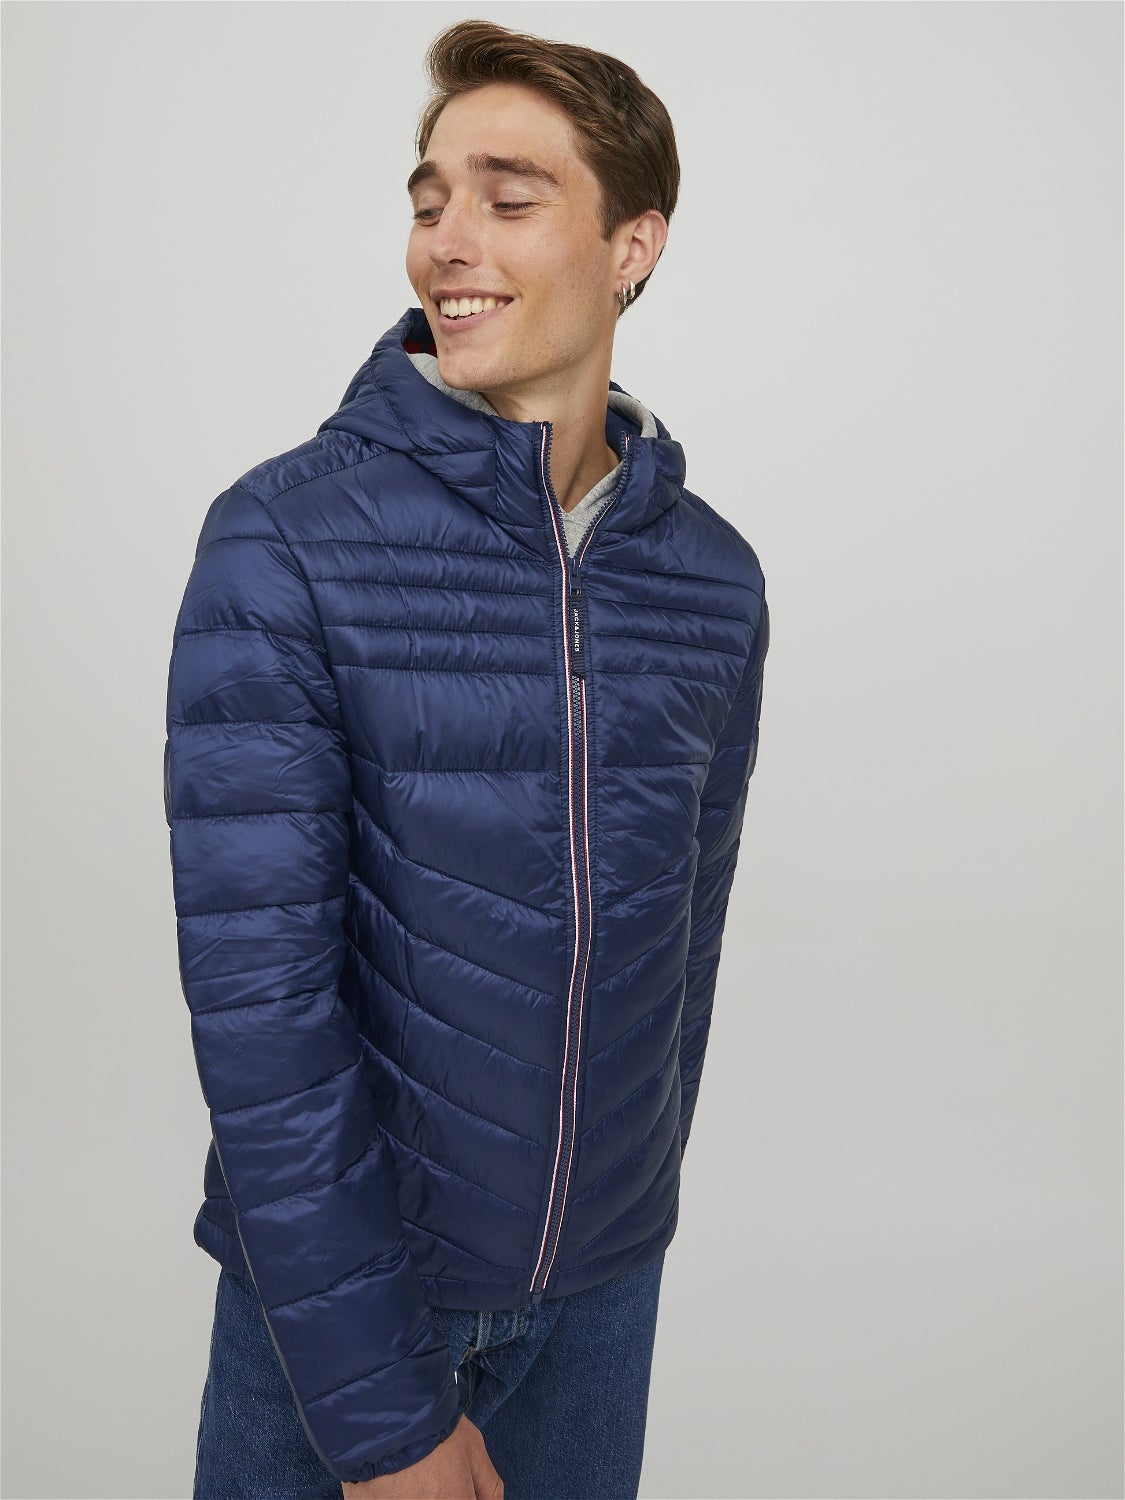 Navy blue puffer jackets | HOWTOWEAR Fashion | Blue puffer jacket, Winter  jacket outfits, Puffer coat outfit